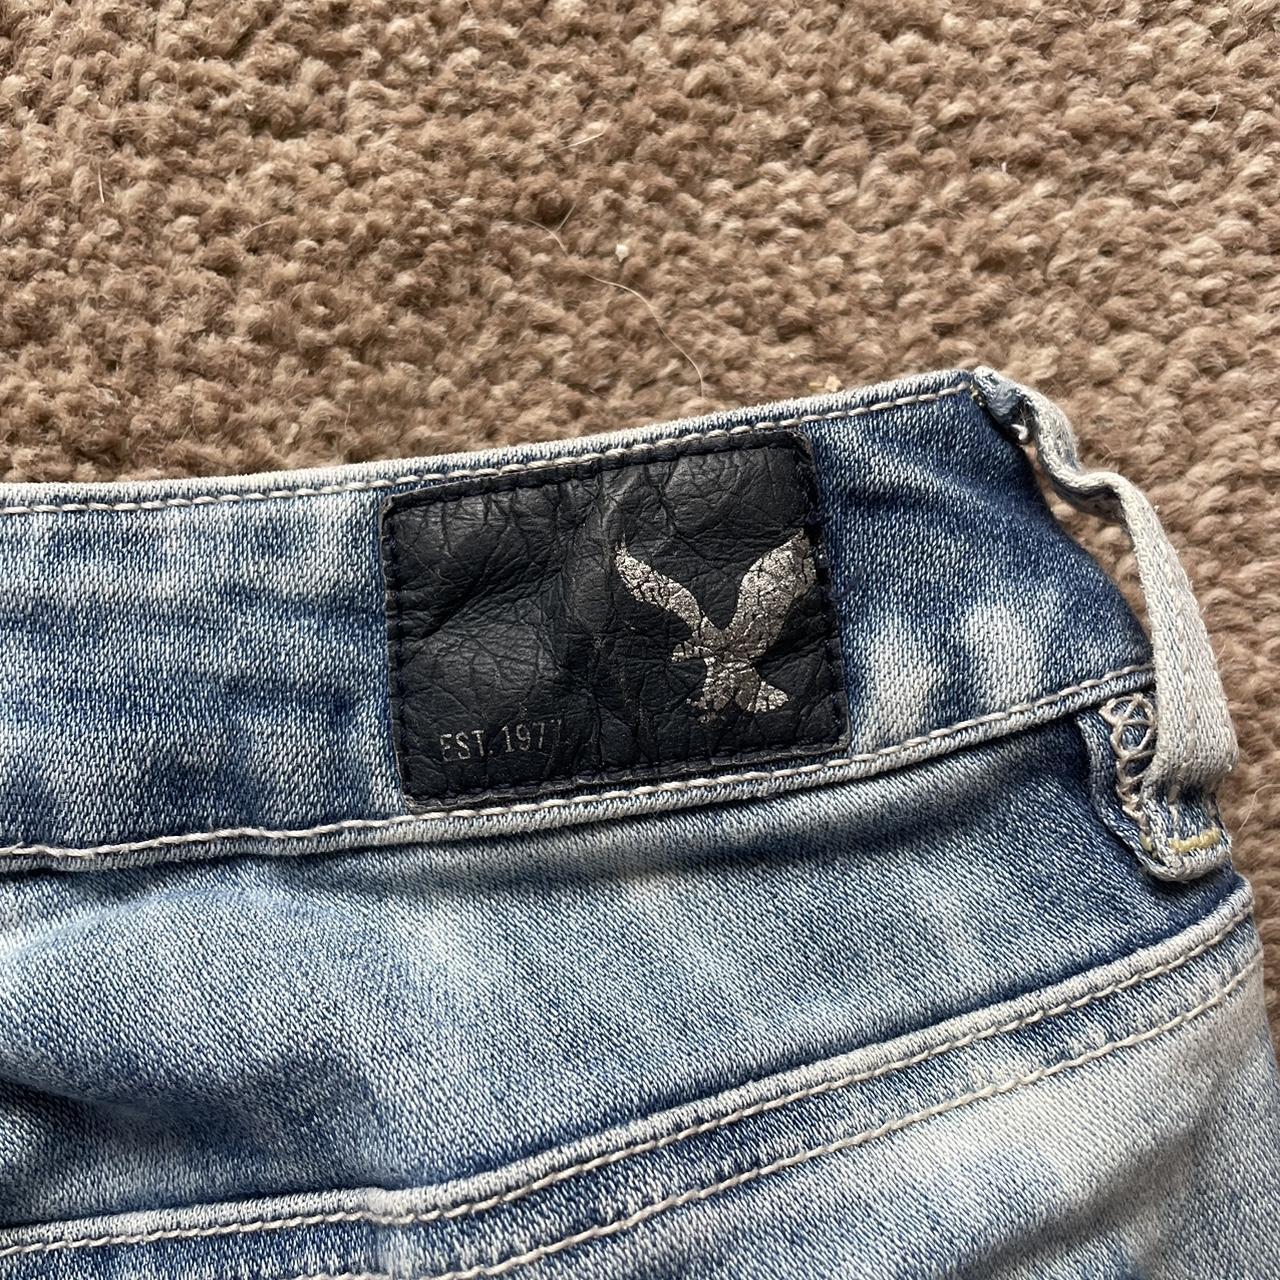 American Eagle Outfitters ripped jeans Super - Depop